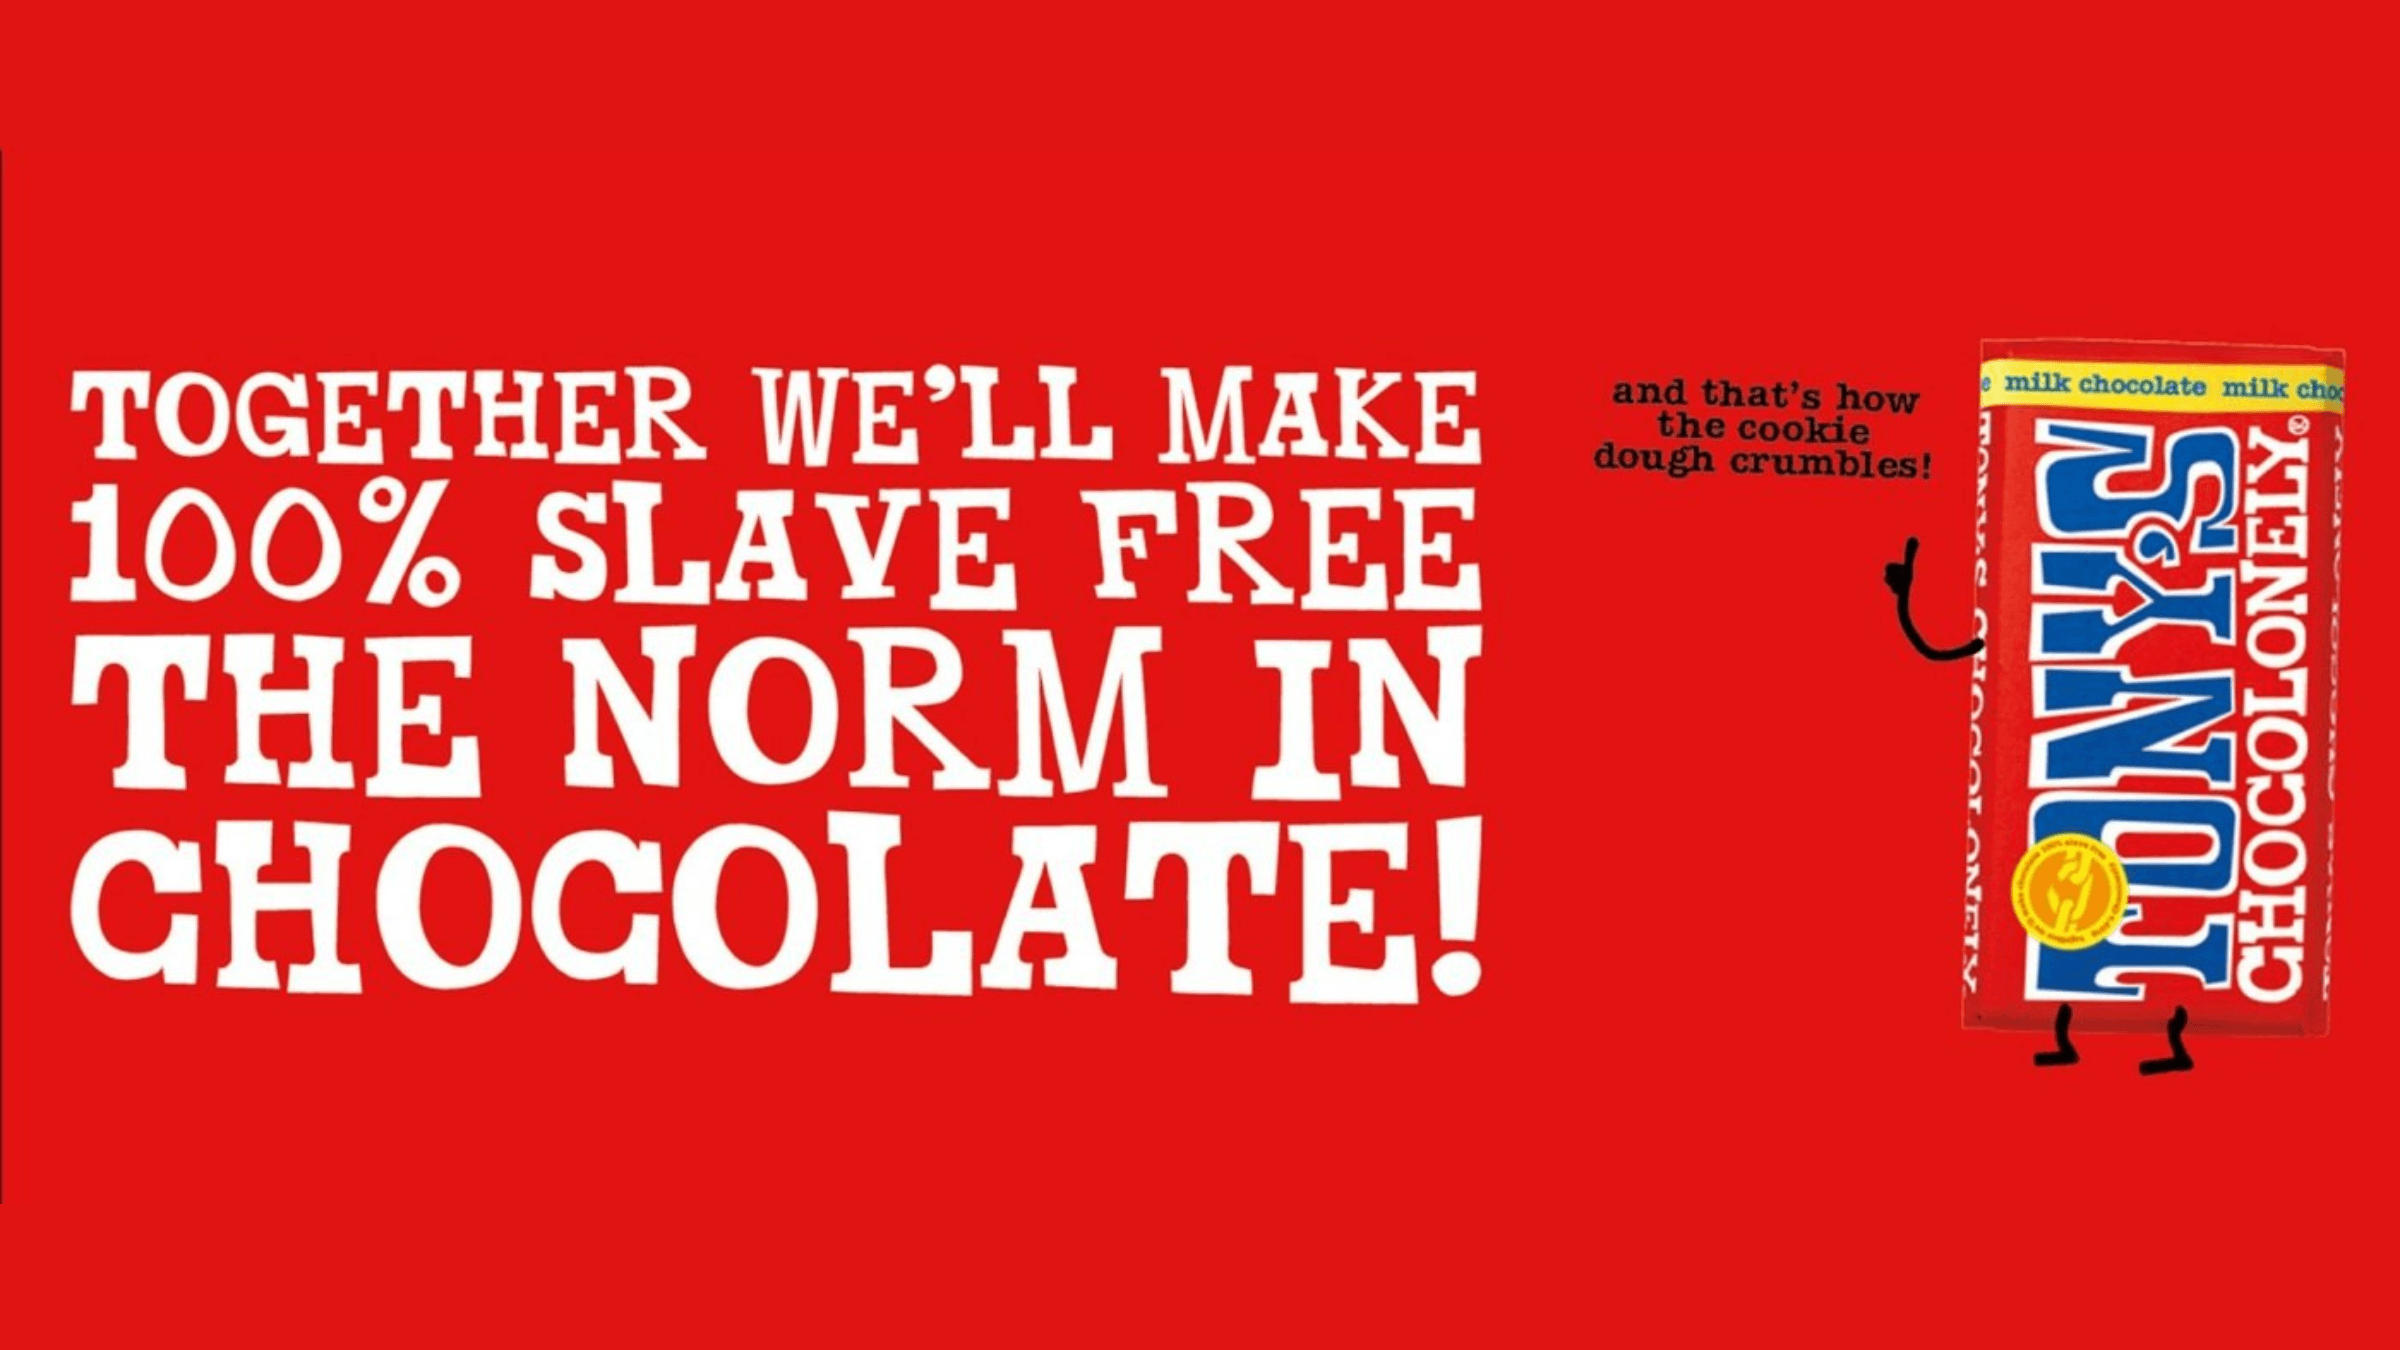 The image reads: Together we'll make 100% slave free the norm in chocolate!